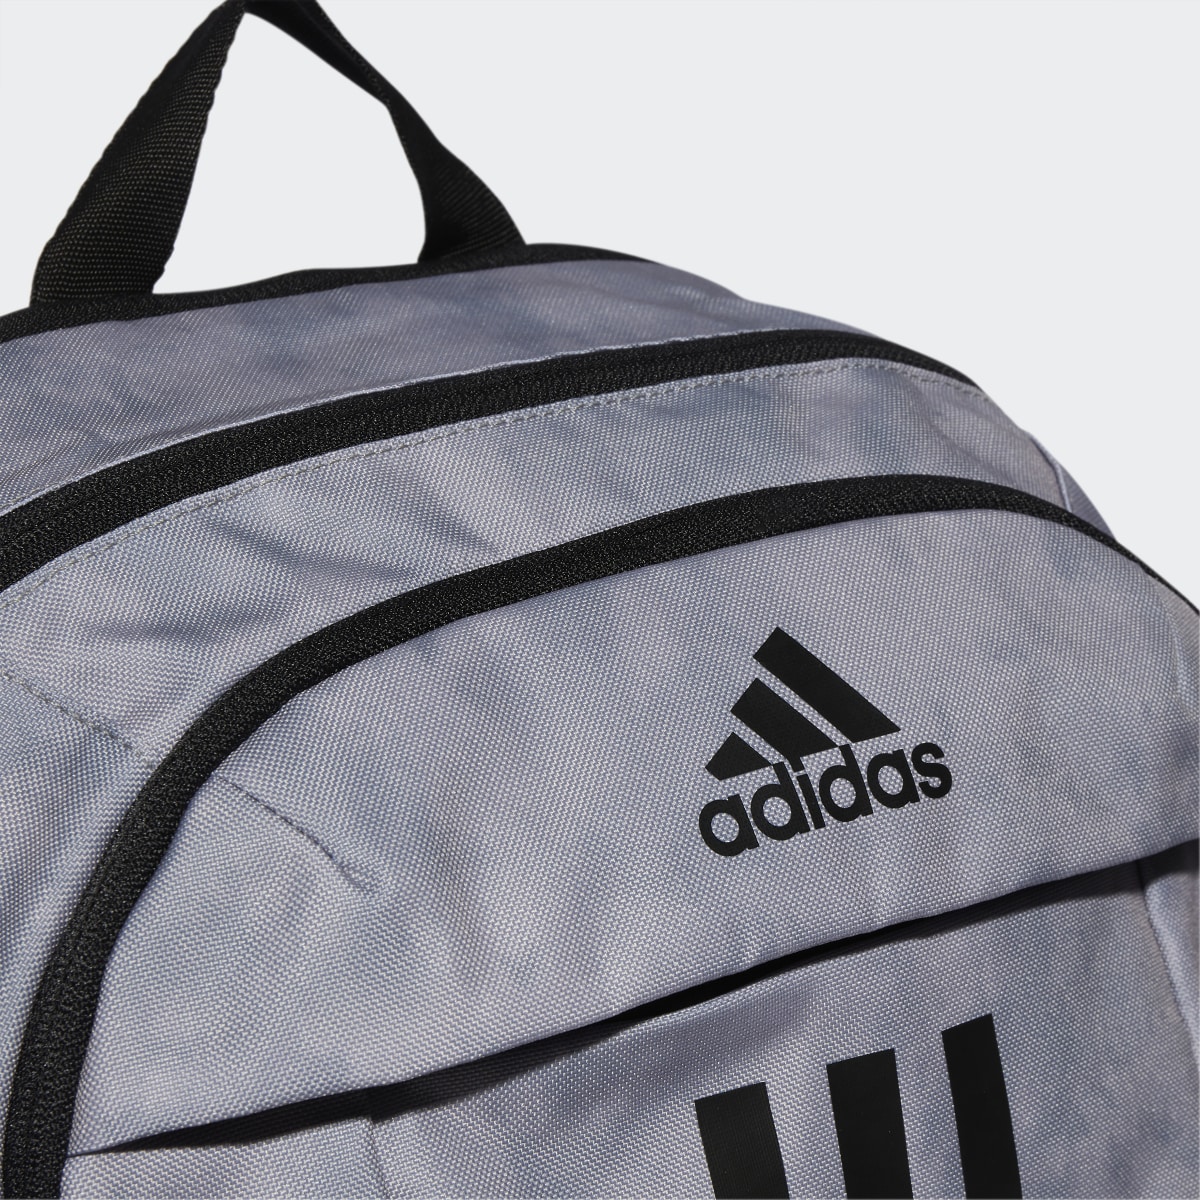 Adidas Power 6 Graphic Backpack. 6